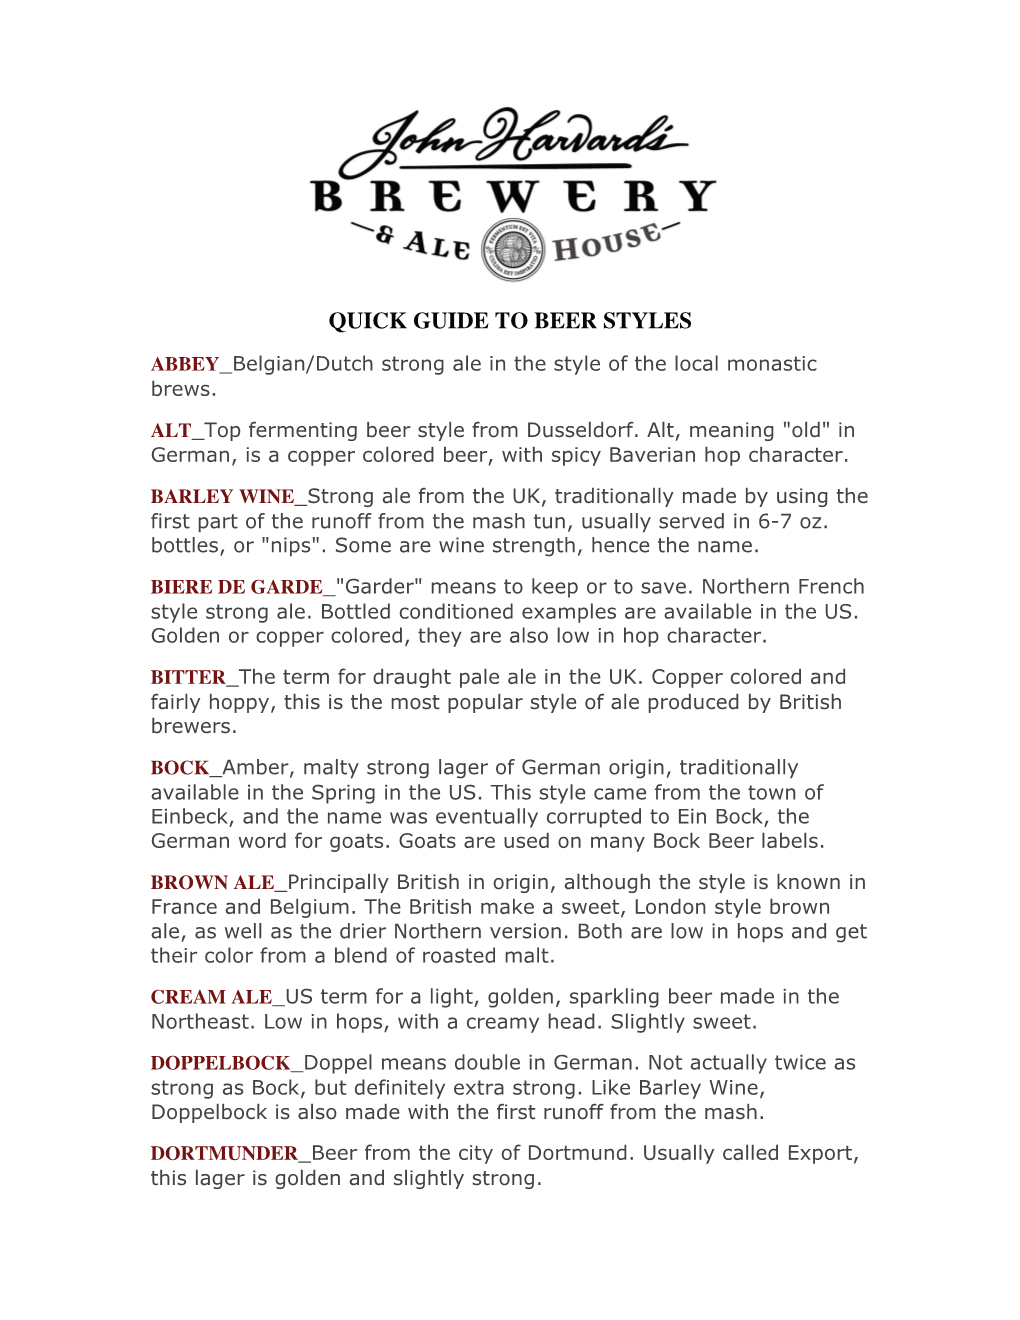 Quick Guide to Beer Styles